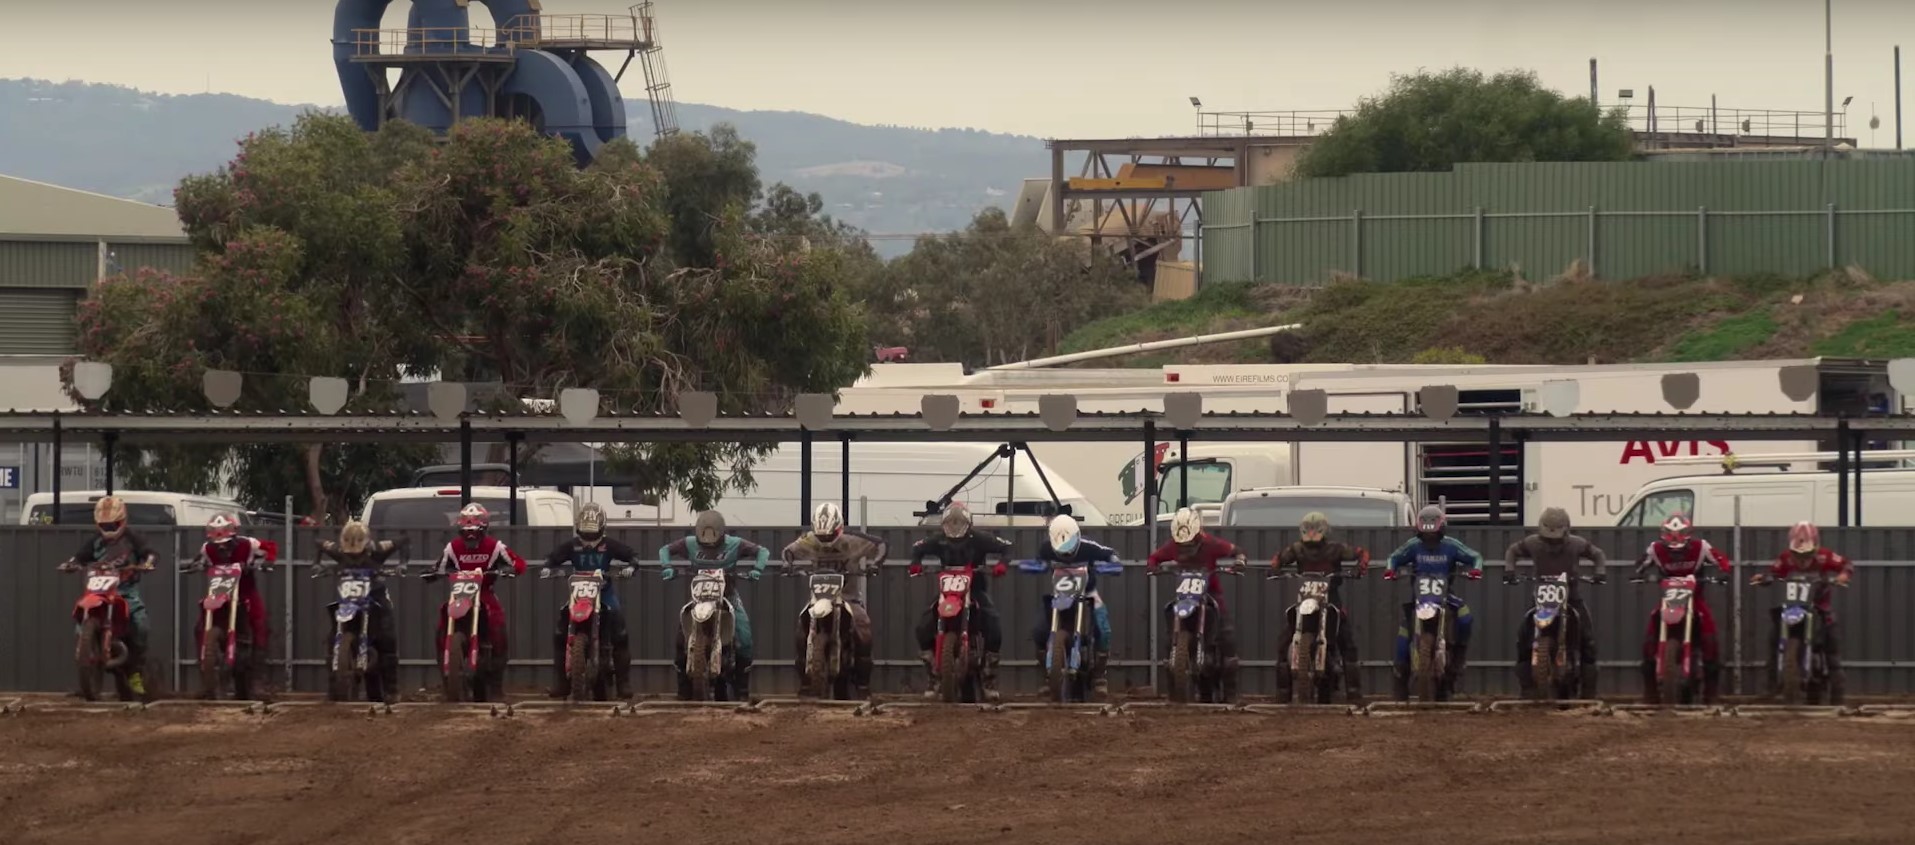 Is the MX Junior Nationals a Real Tournament? Is MaveriX a Real Motocross Team?